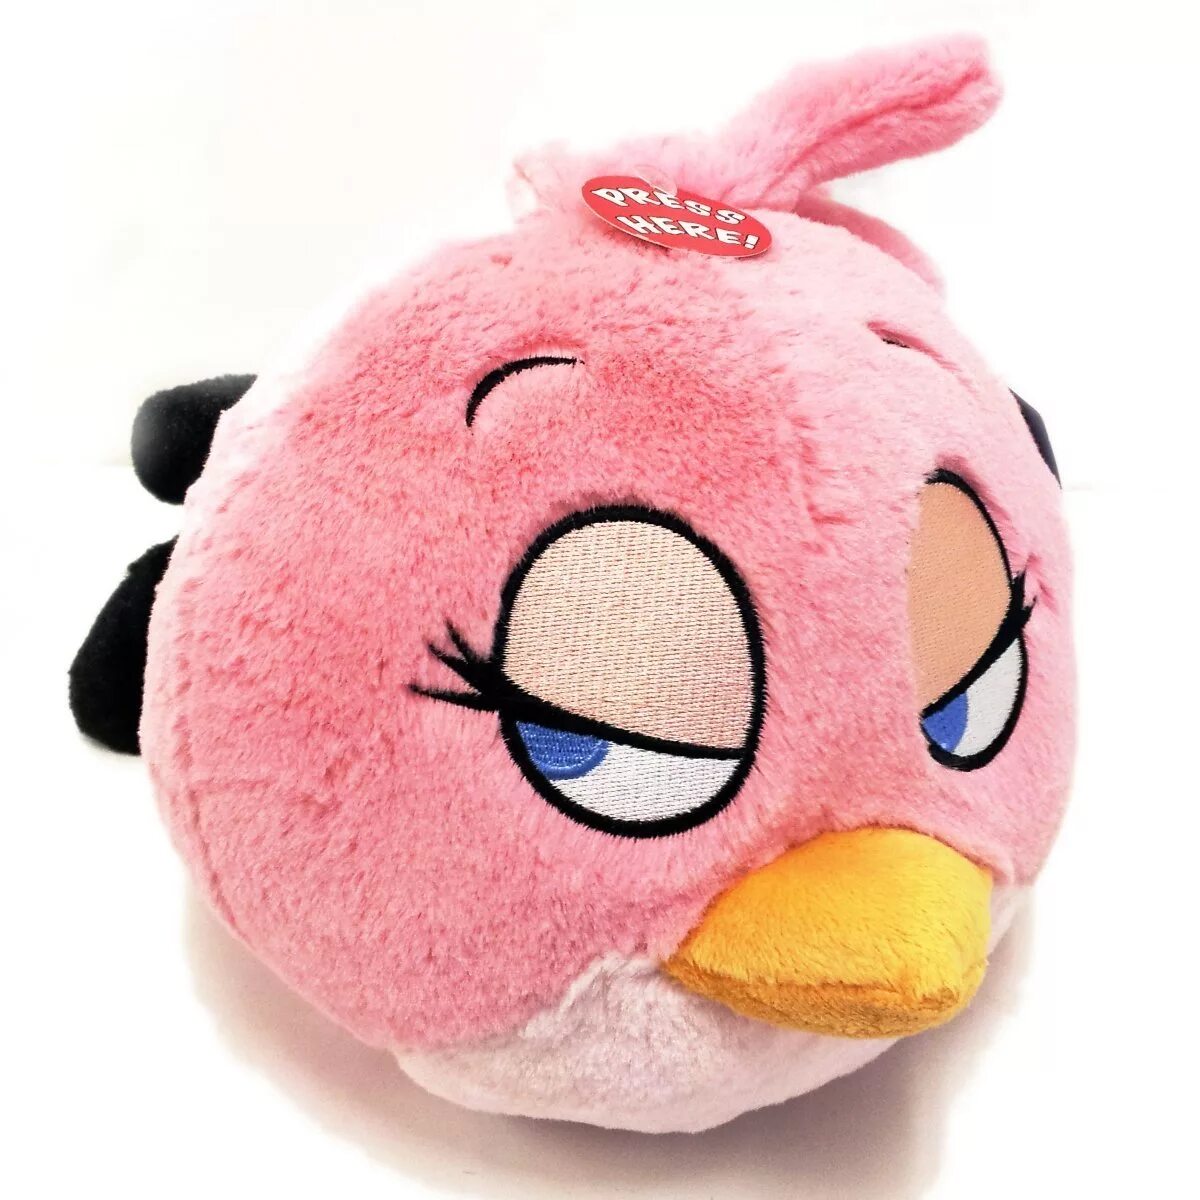 Angry Birds Plush Toys. Angry Birds Теренс мягкая игрушка. Angry Birds Pink Bird Plush Toy.